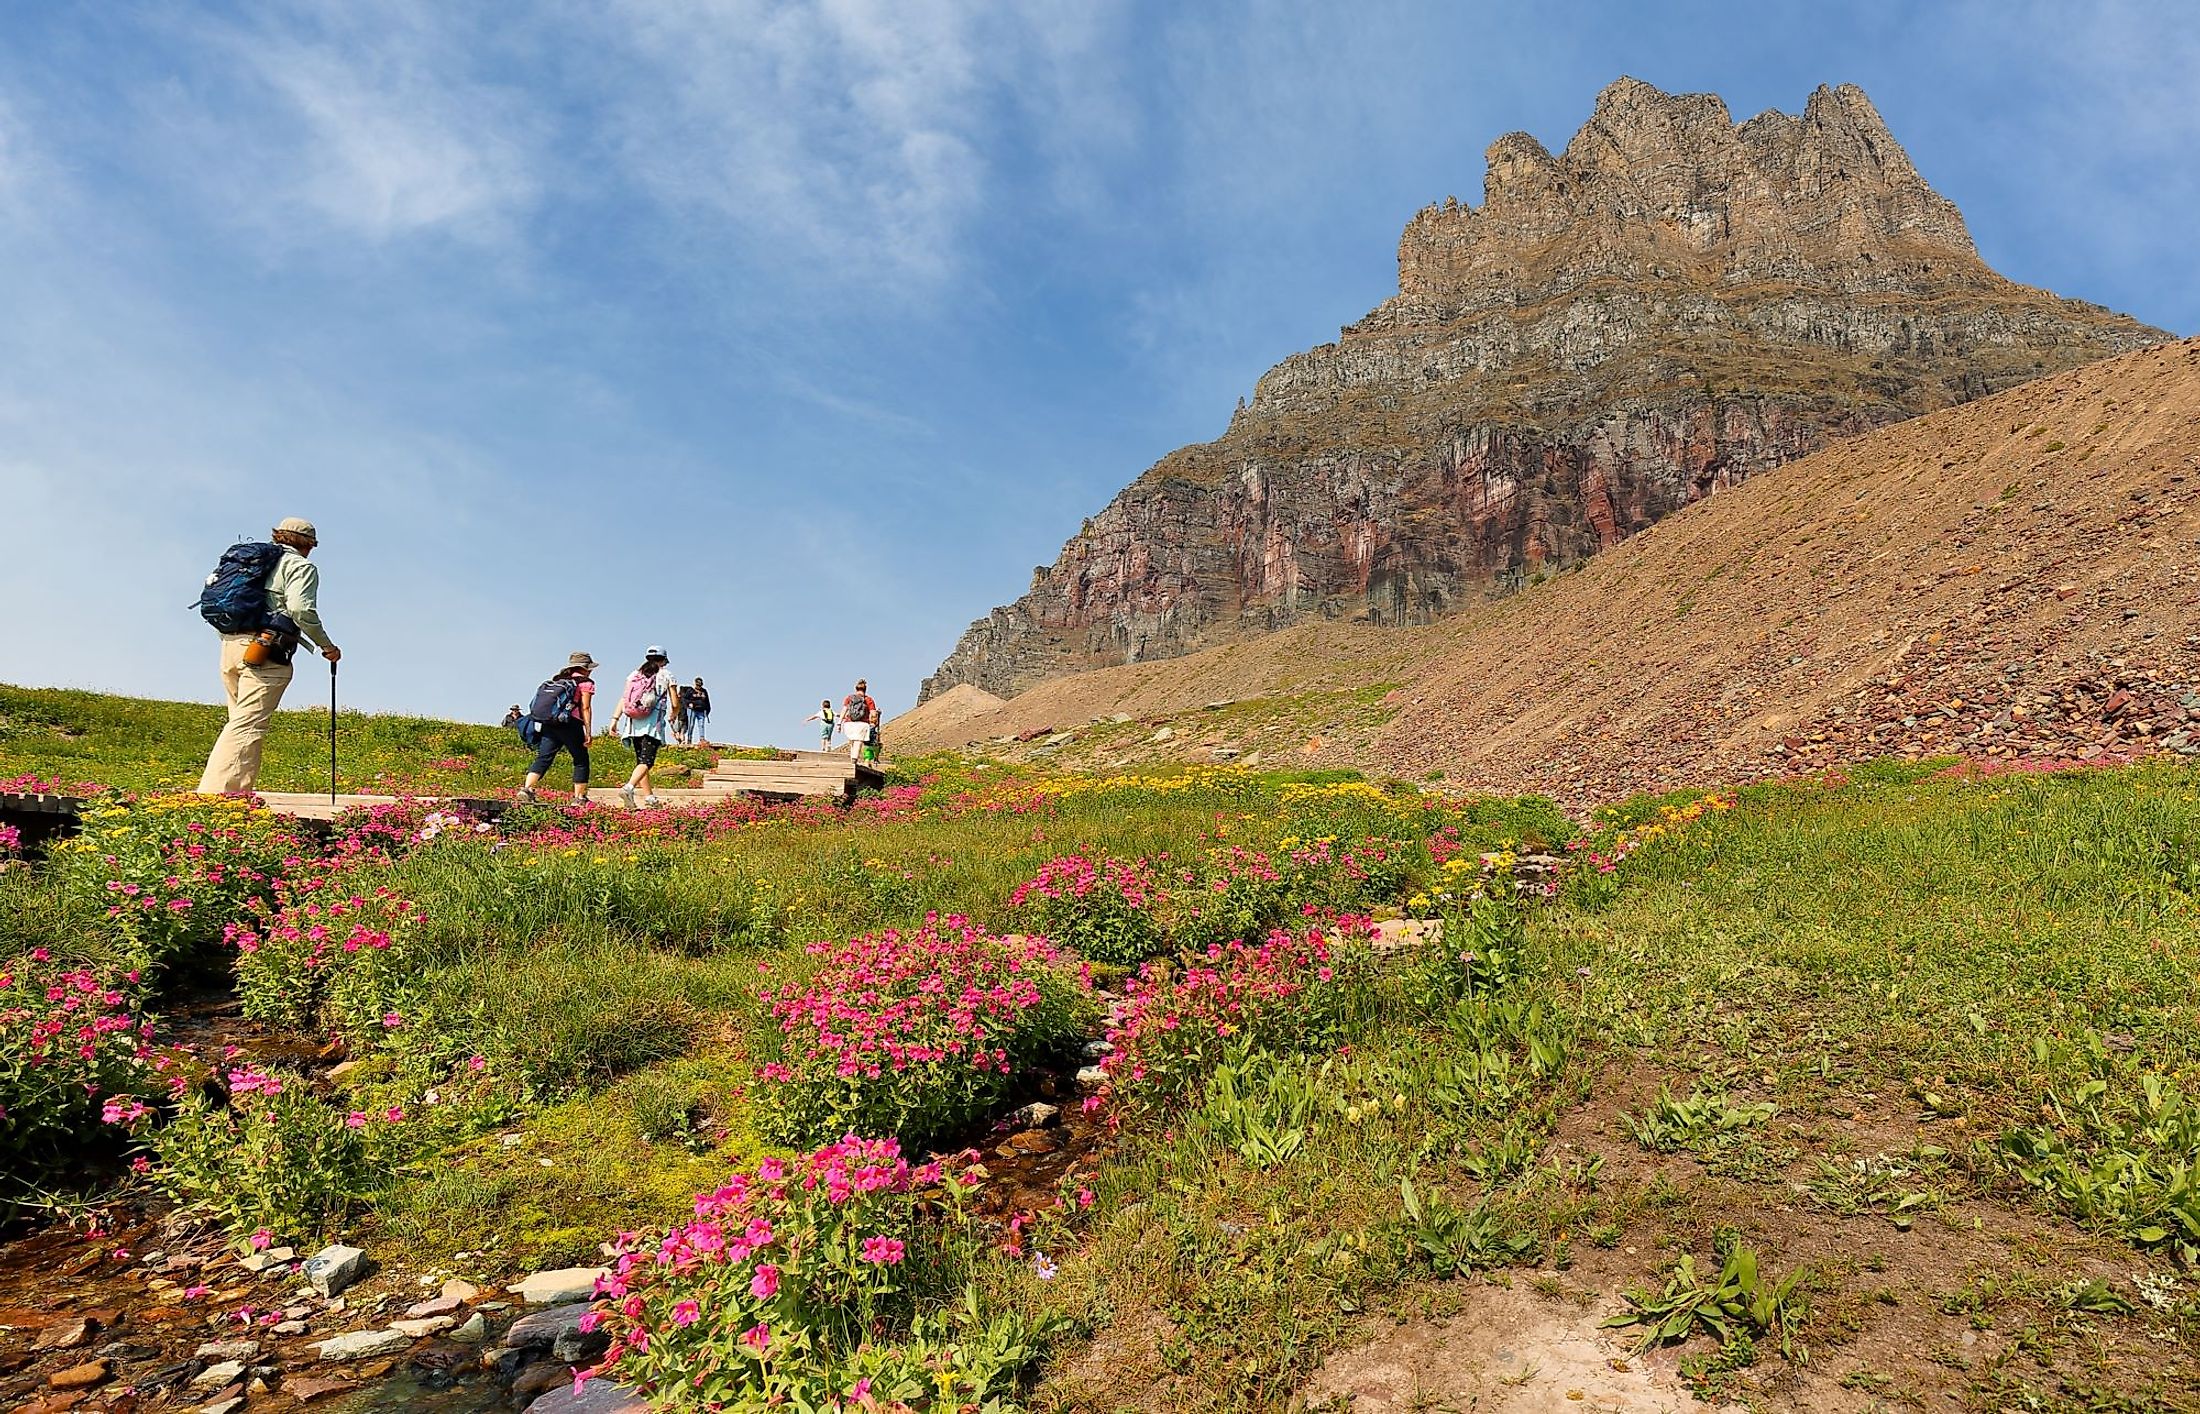 Overview of Logan Pass with tourist walking in Glacier National Park, Montana. Editorial credit: Jay Yuan / Shutterstock.com